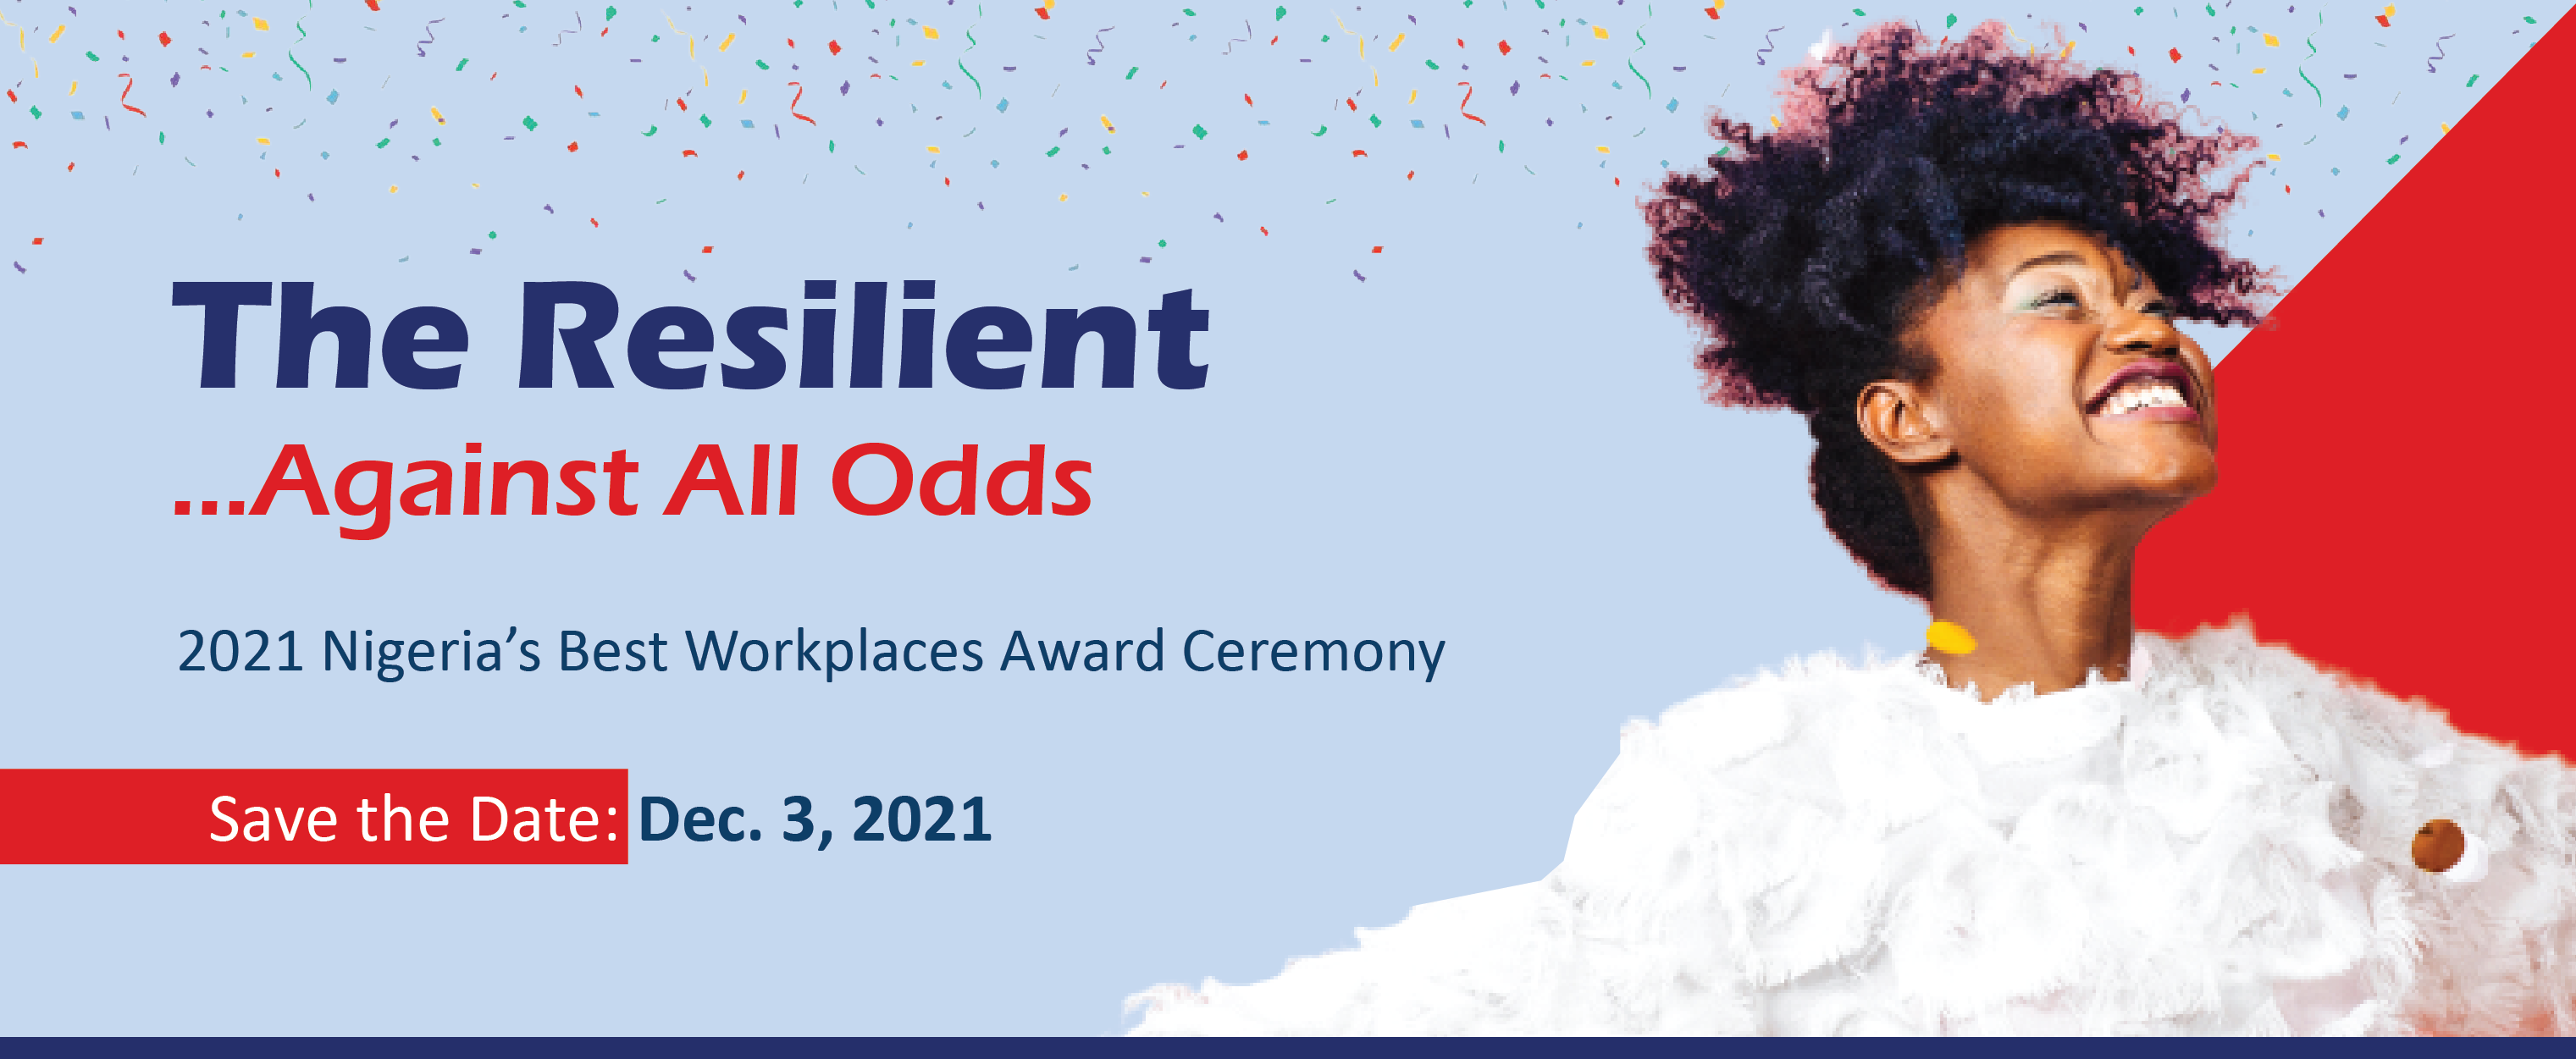 Save the Date. 2021 Great Place To Work Award Ceremony